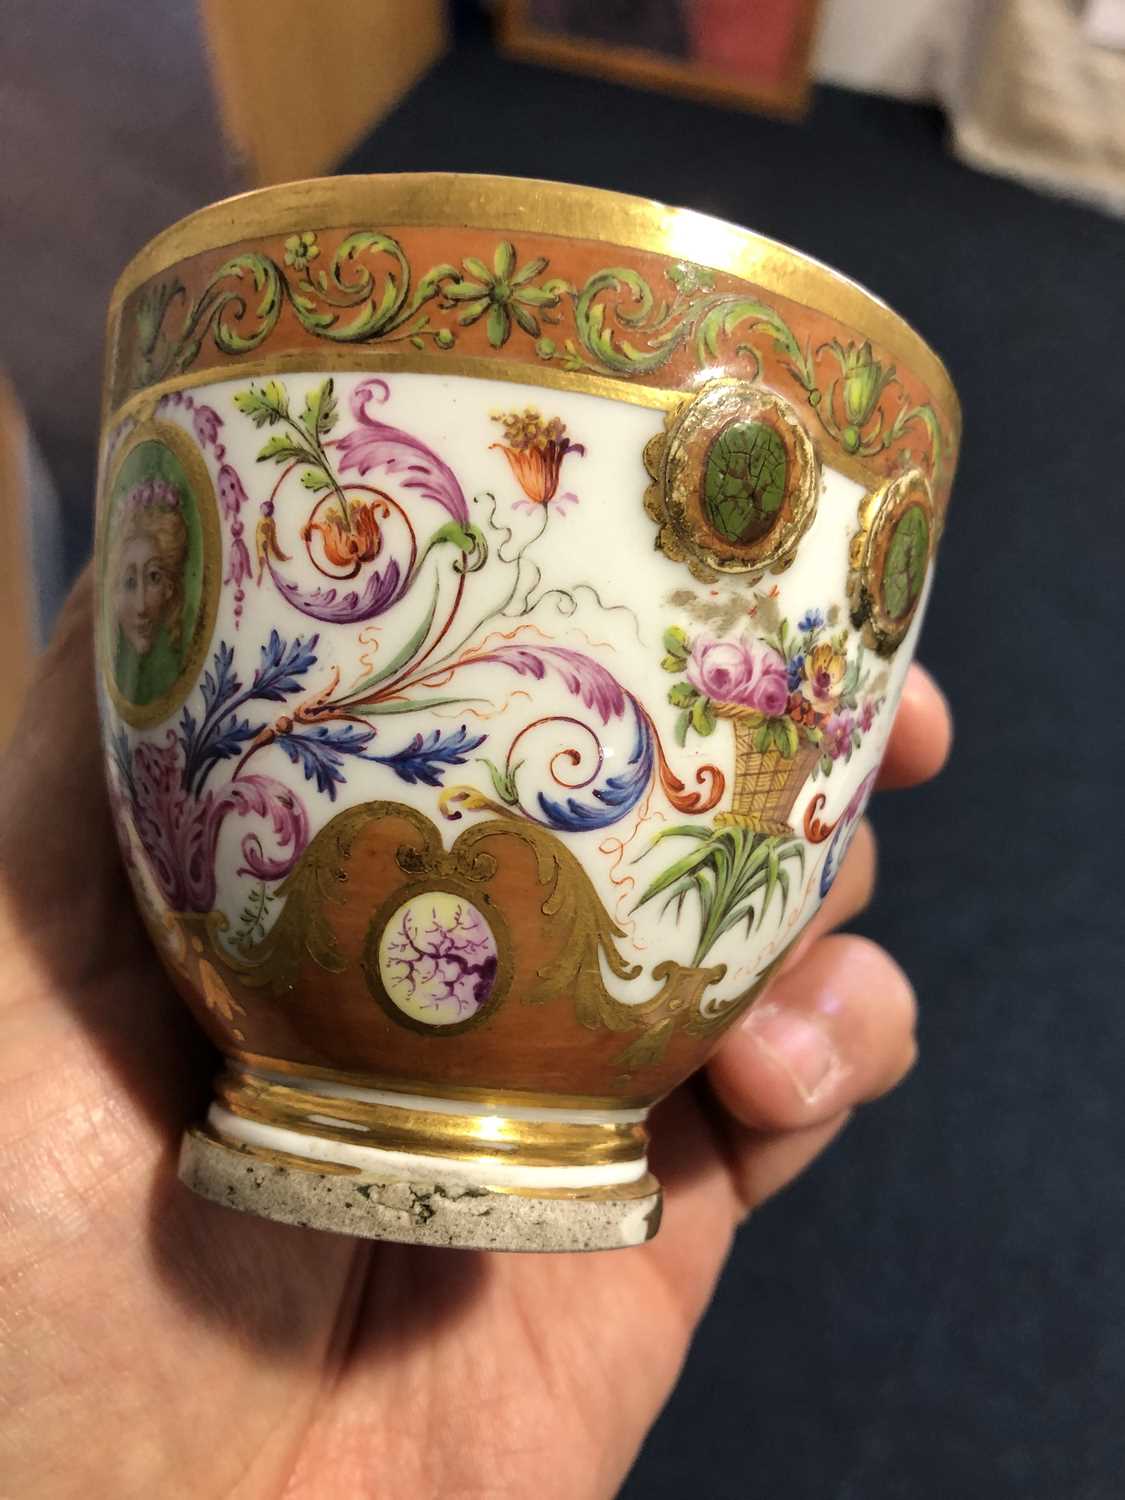 A late 18th century Serves two handled cup, with a raised central band decorated with roses and - Image 6 of 14